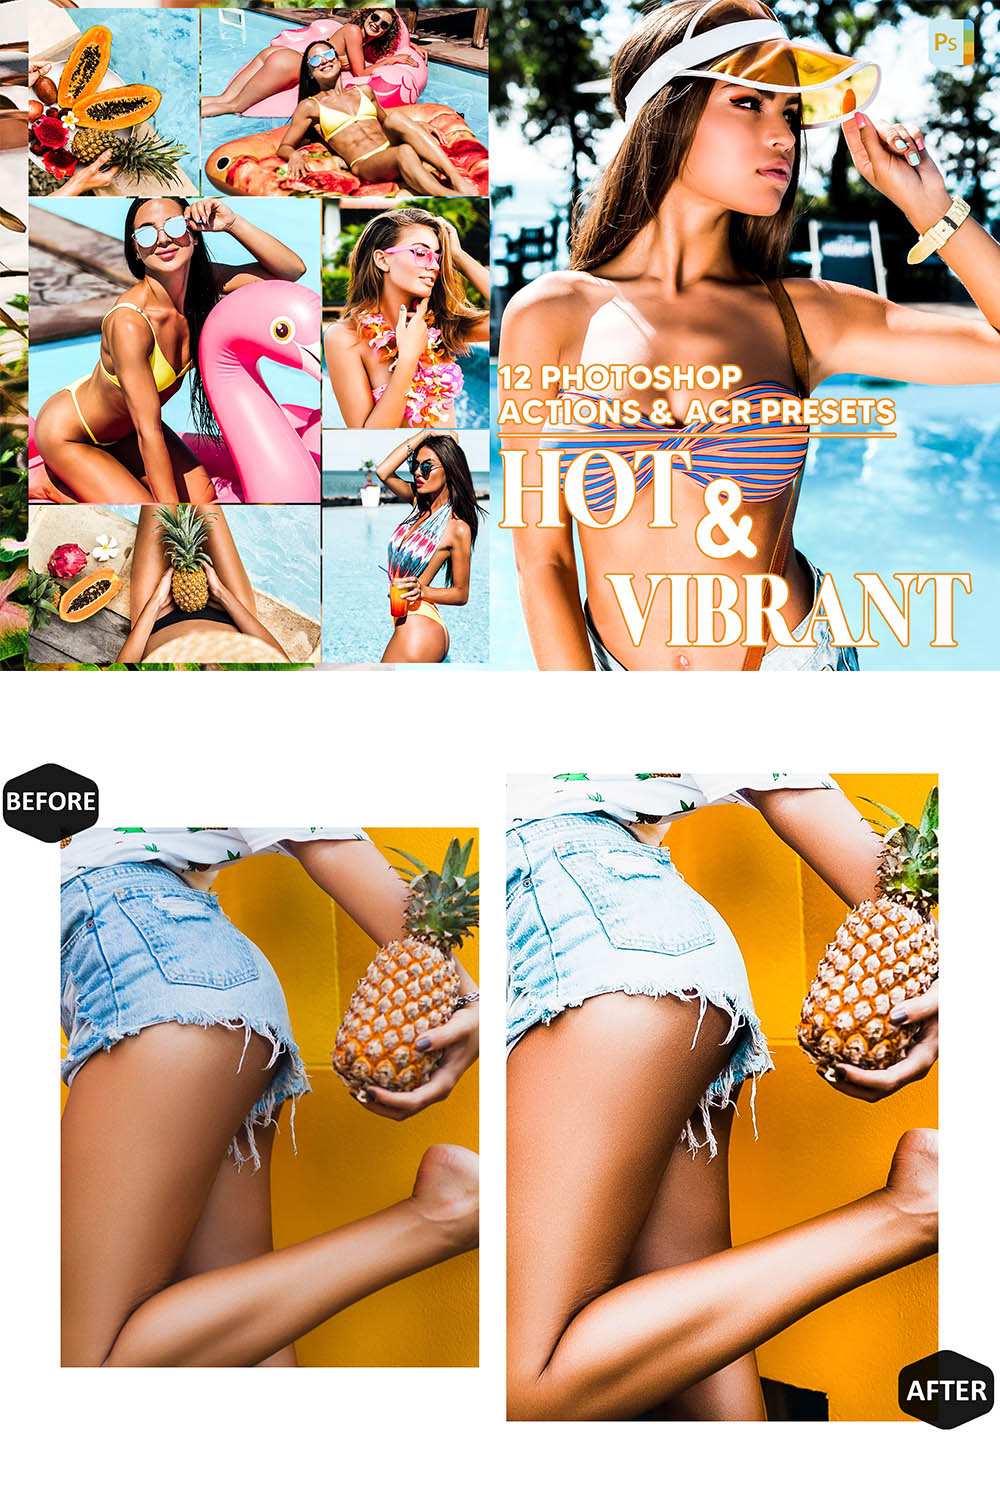 12 Photoshop Actions, Hot & Vibrant Ps Action, Bright ACR Preset, Colorful Ps Filter, Atn Portrait And Lifestyle Theme For Instagram, Blogger pinterest preview image.